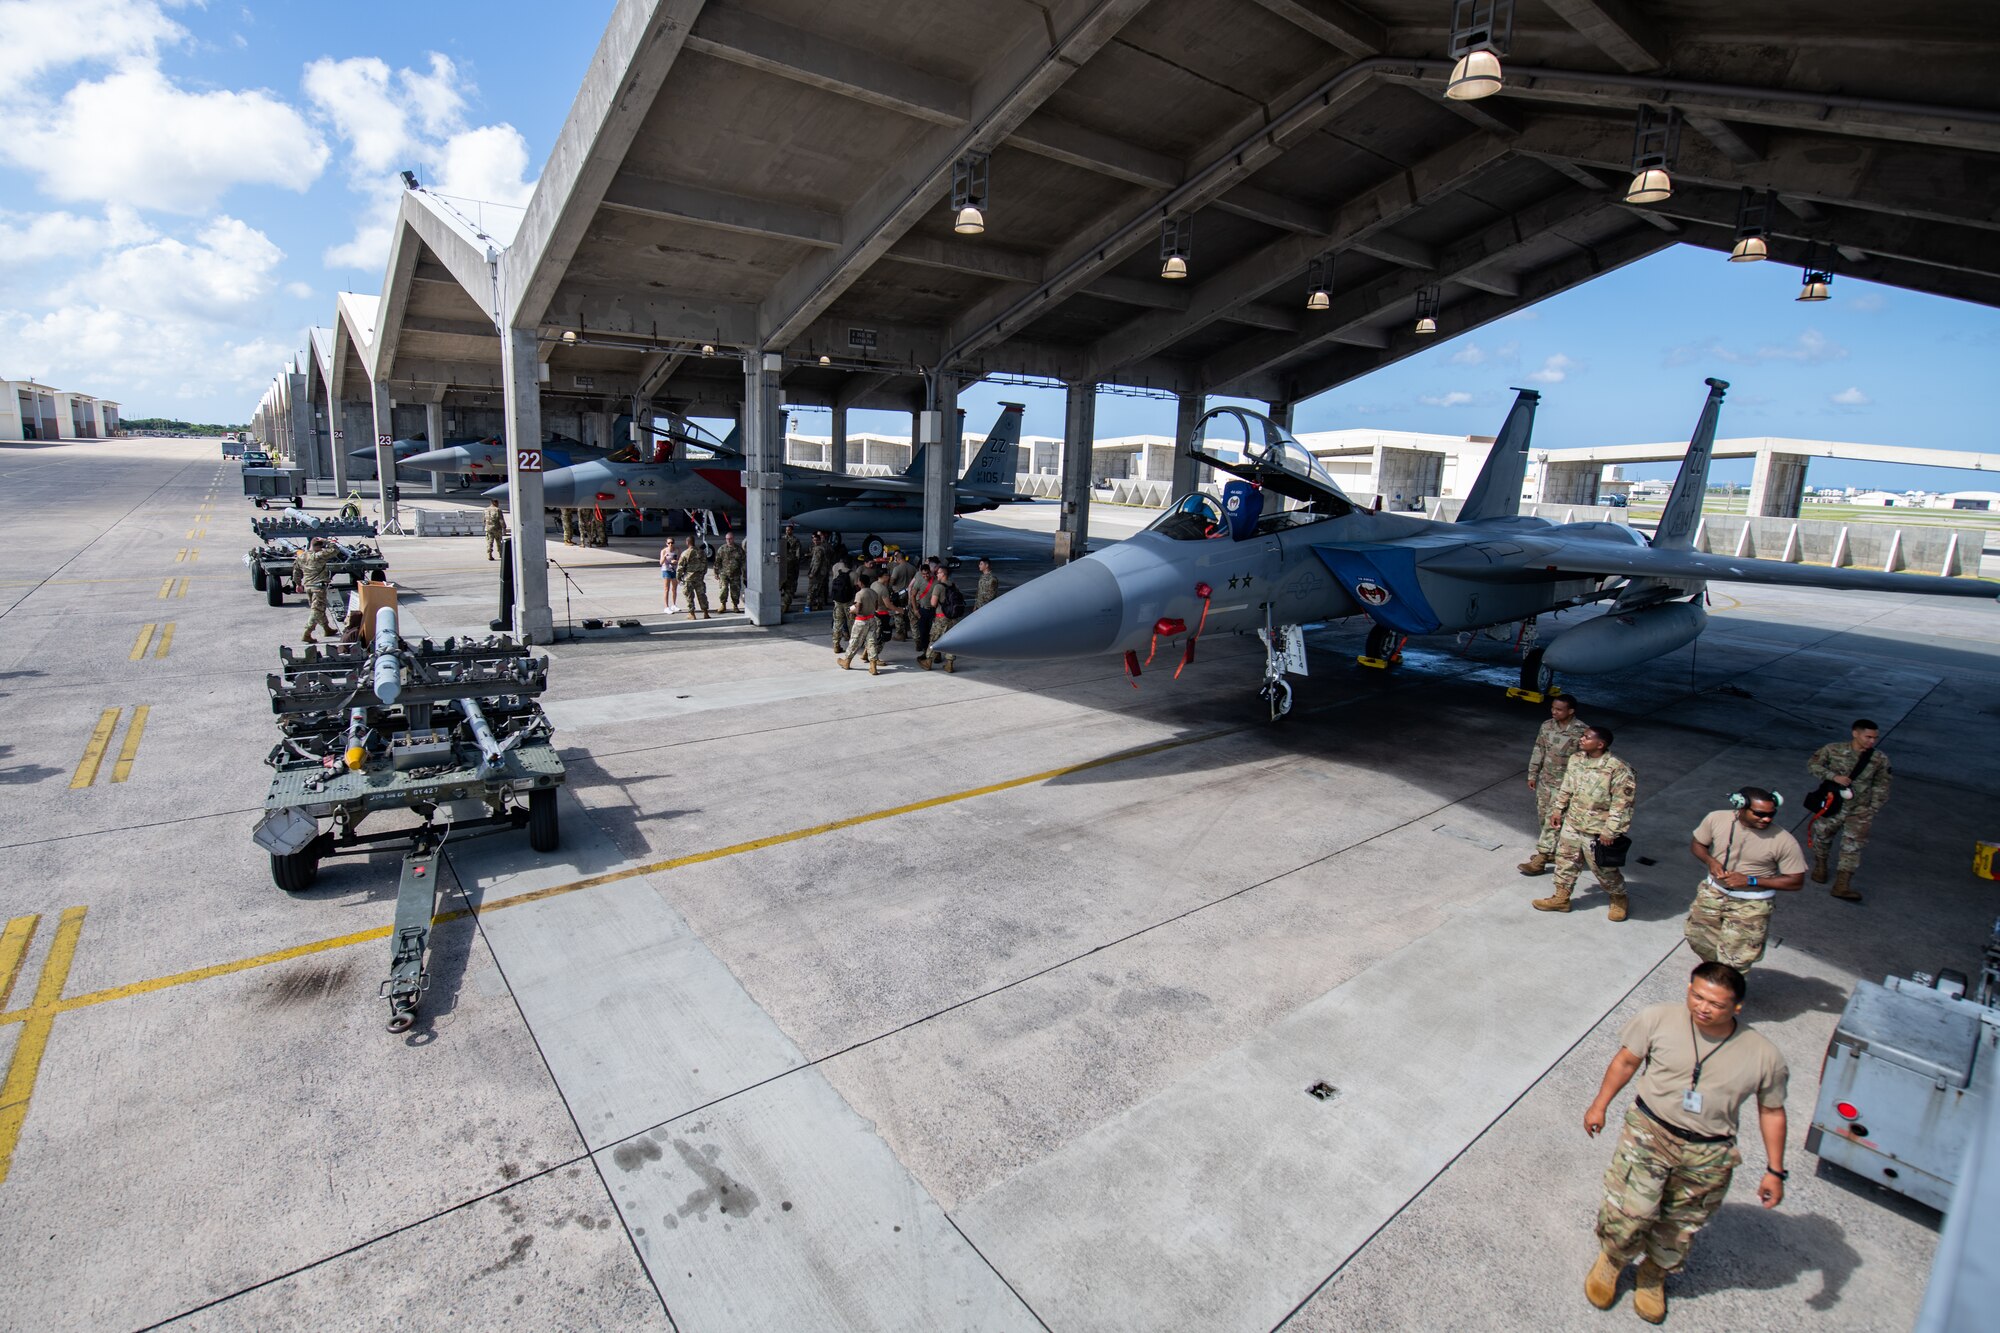 Fighter jets and maintenance workers wait under hangars to begin a load competition underneath the bright sun.